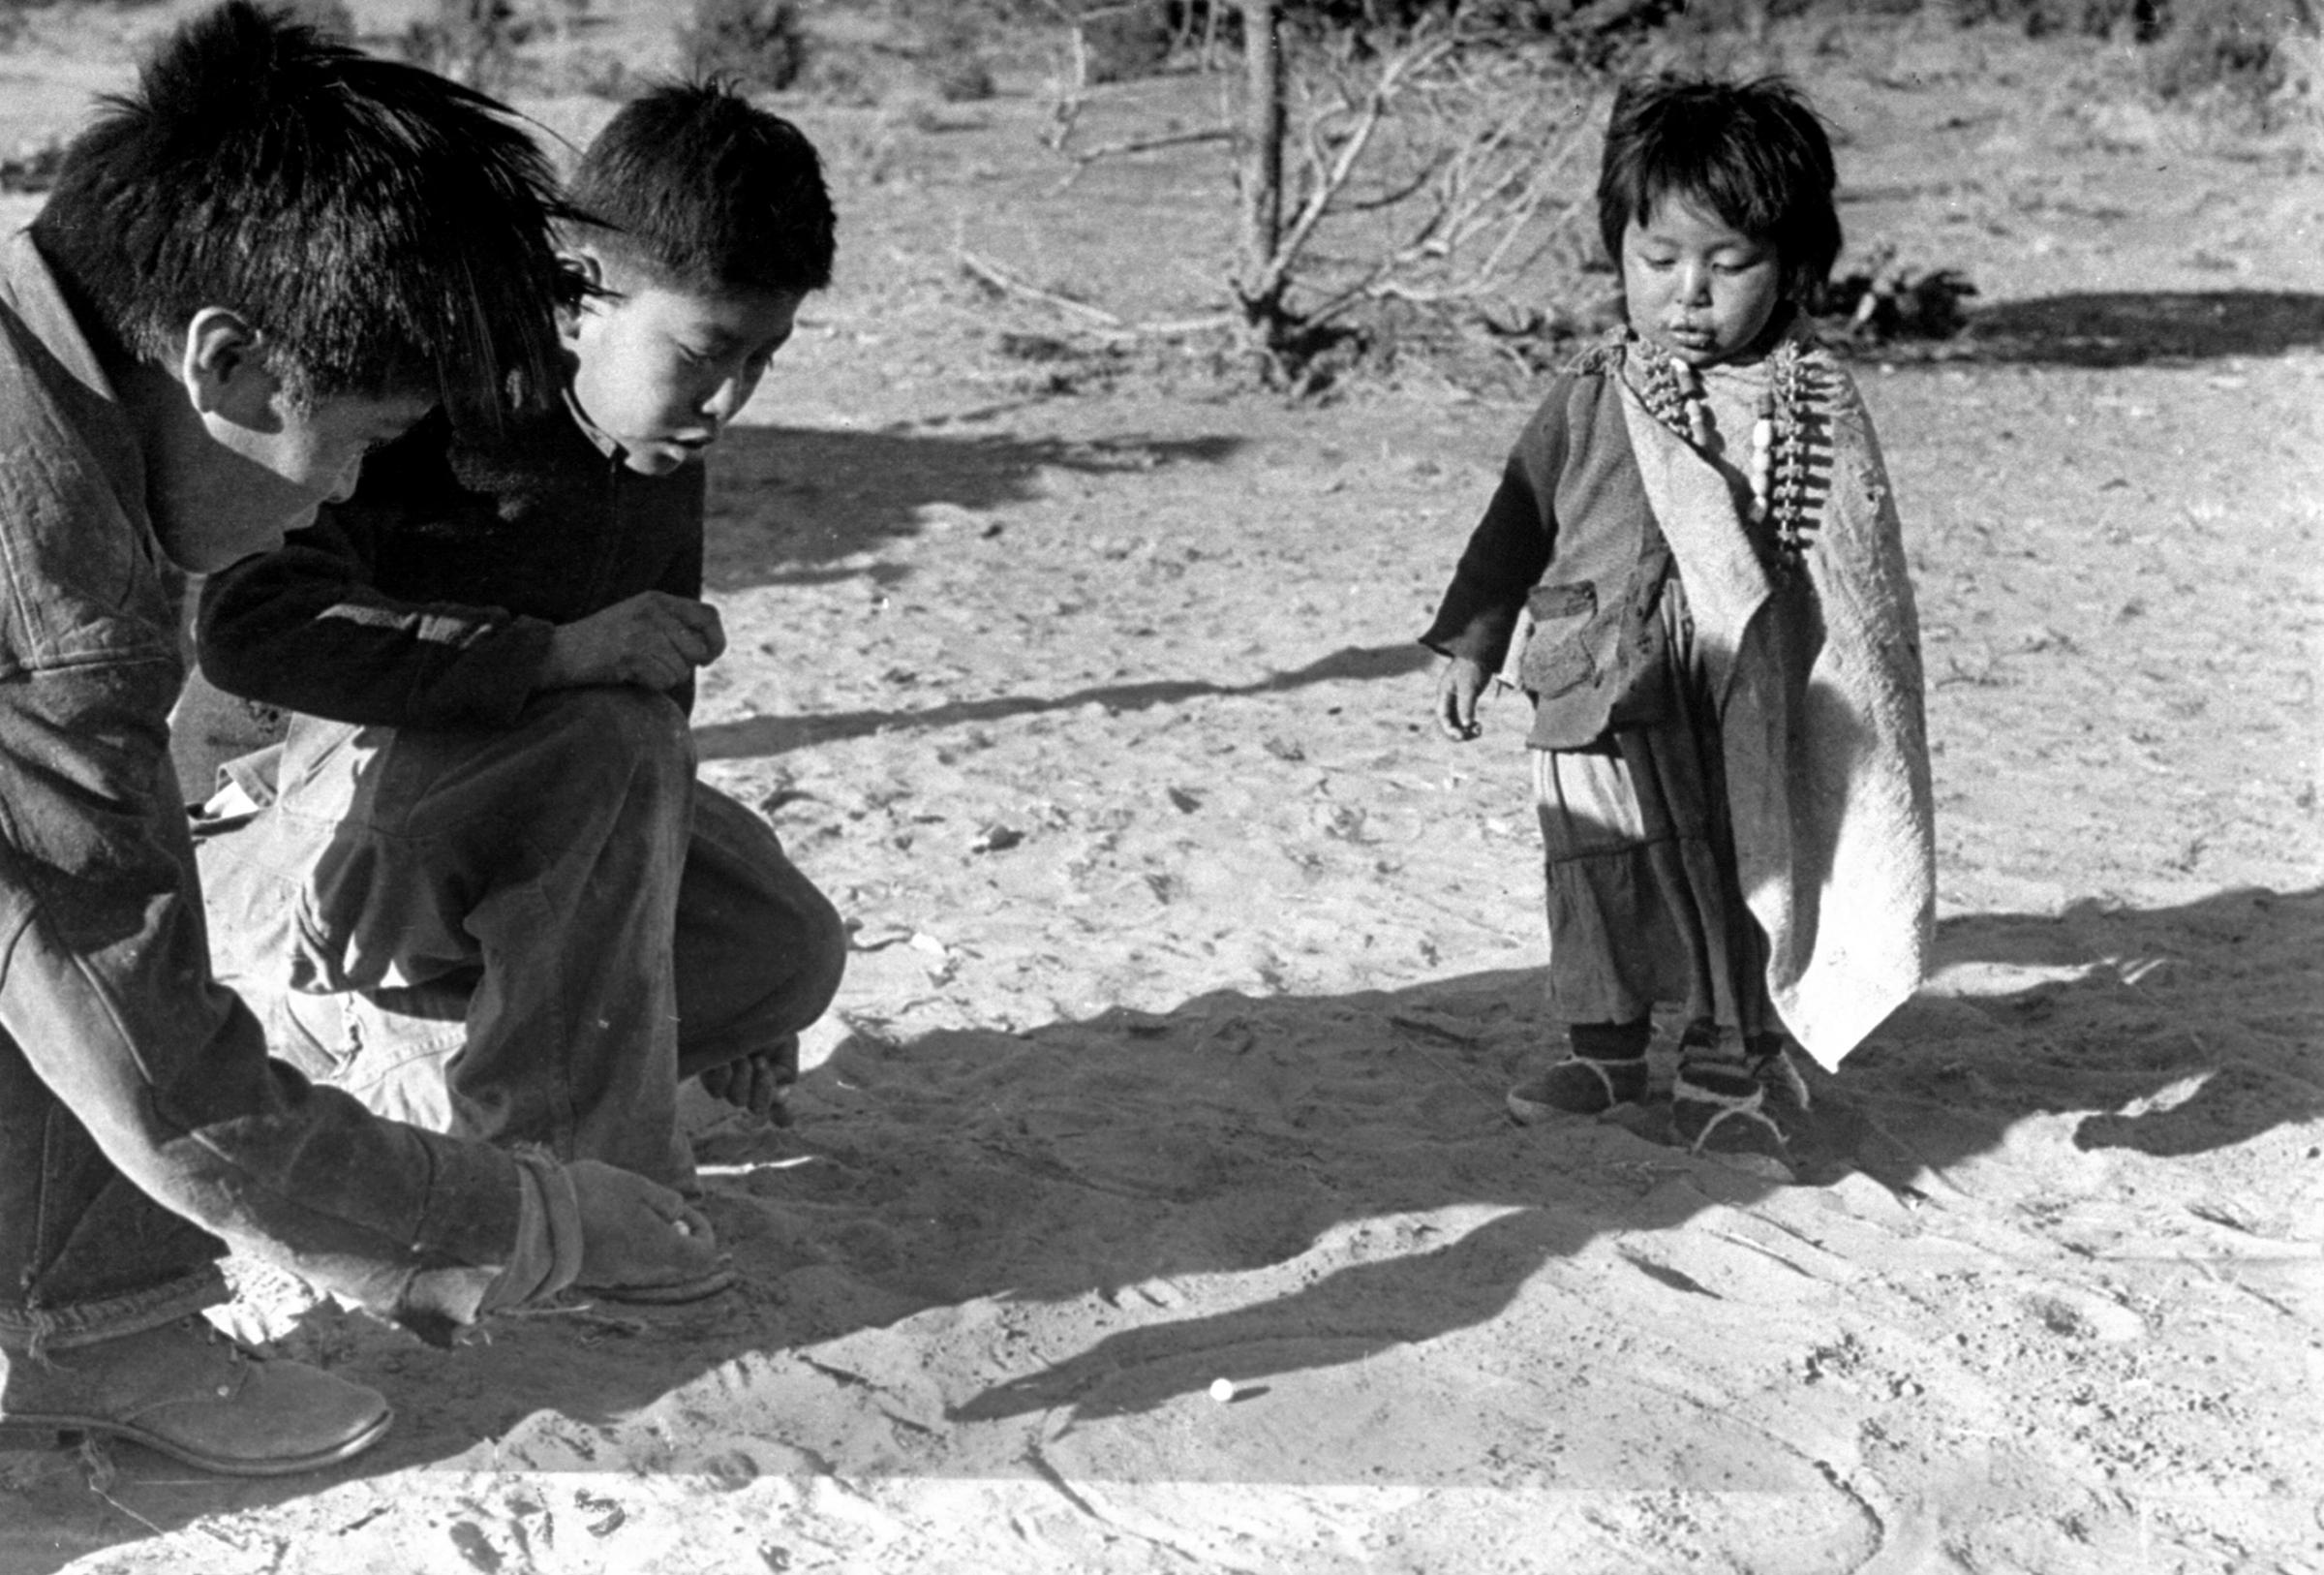 Game of marbles, one popular part of white man's culture, is explained by small boy at center to brother and sister. This boy goes to school and learned the game there. His brother has to stay home to help with the sheepherding.